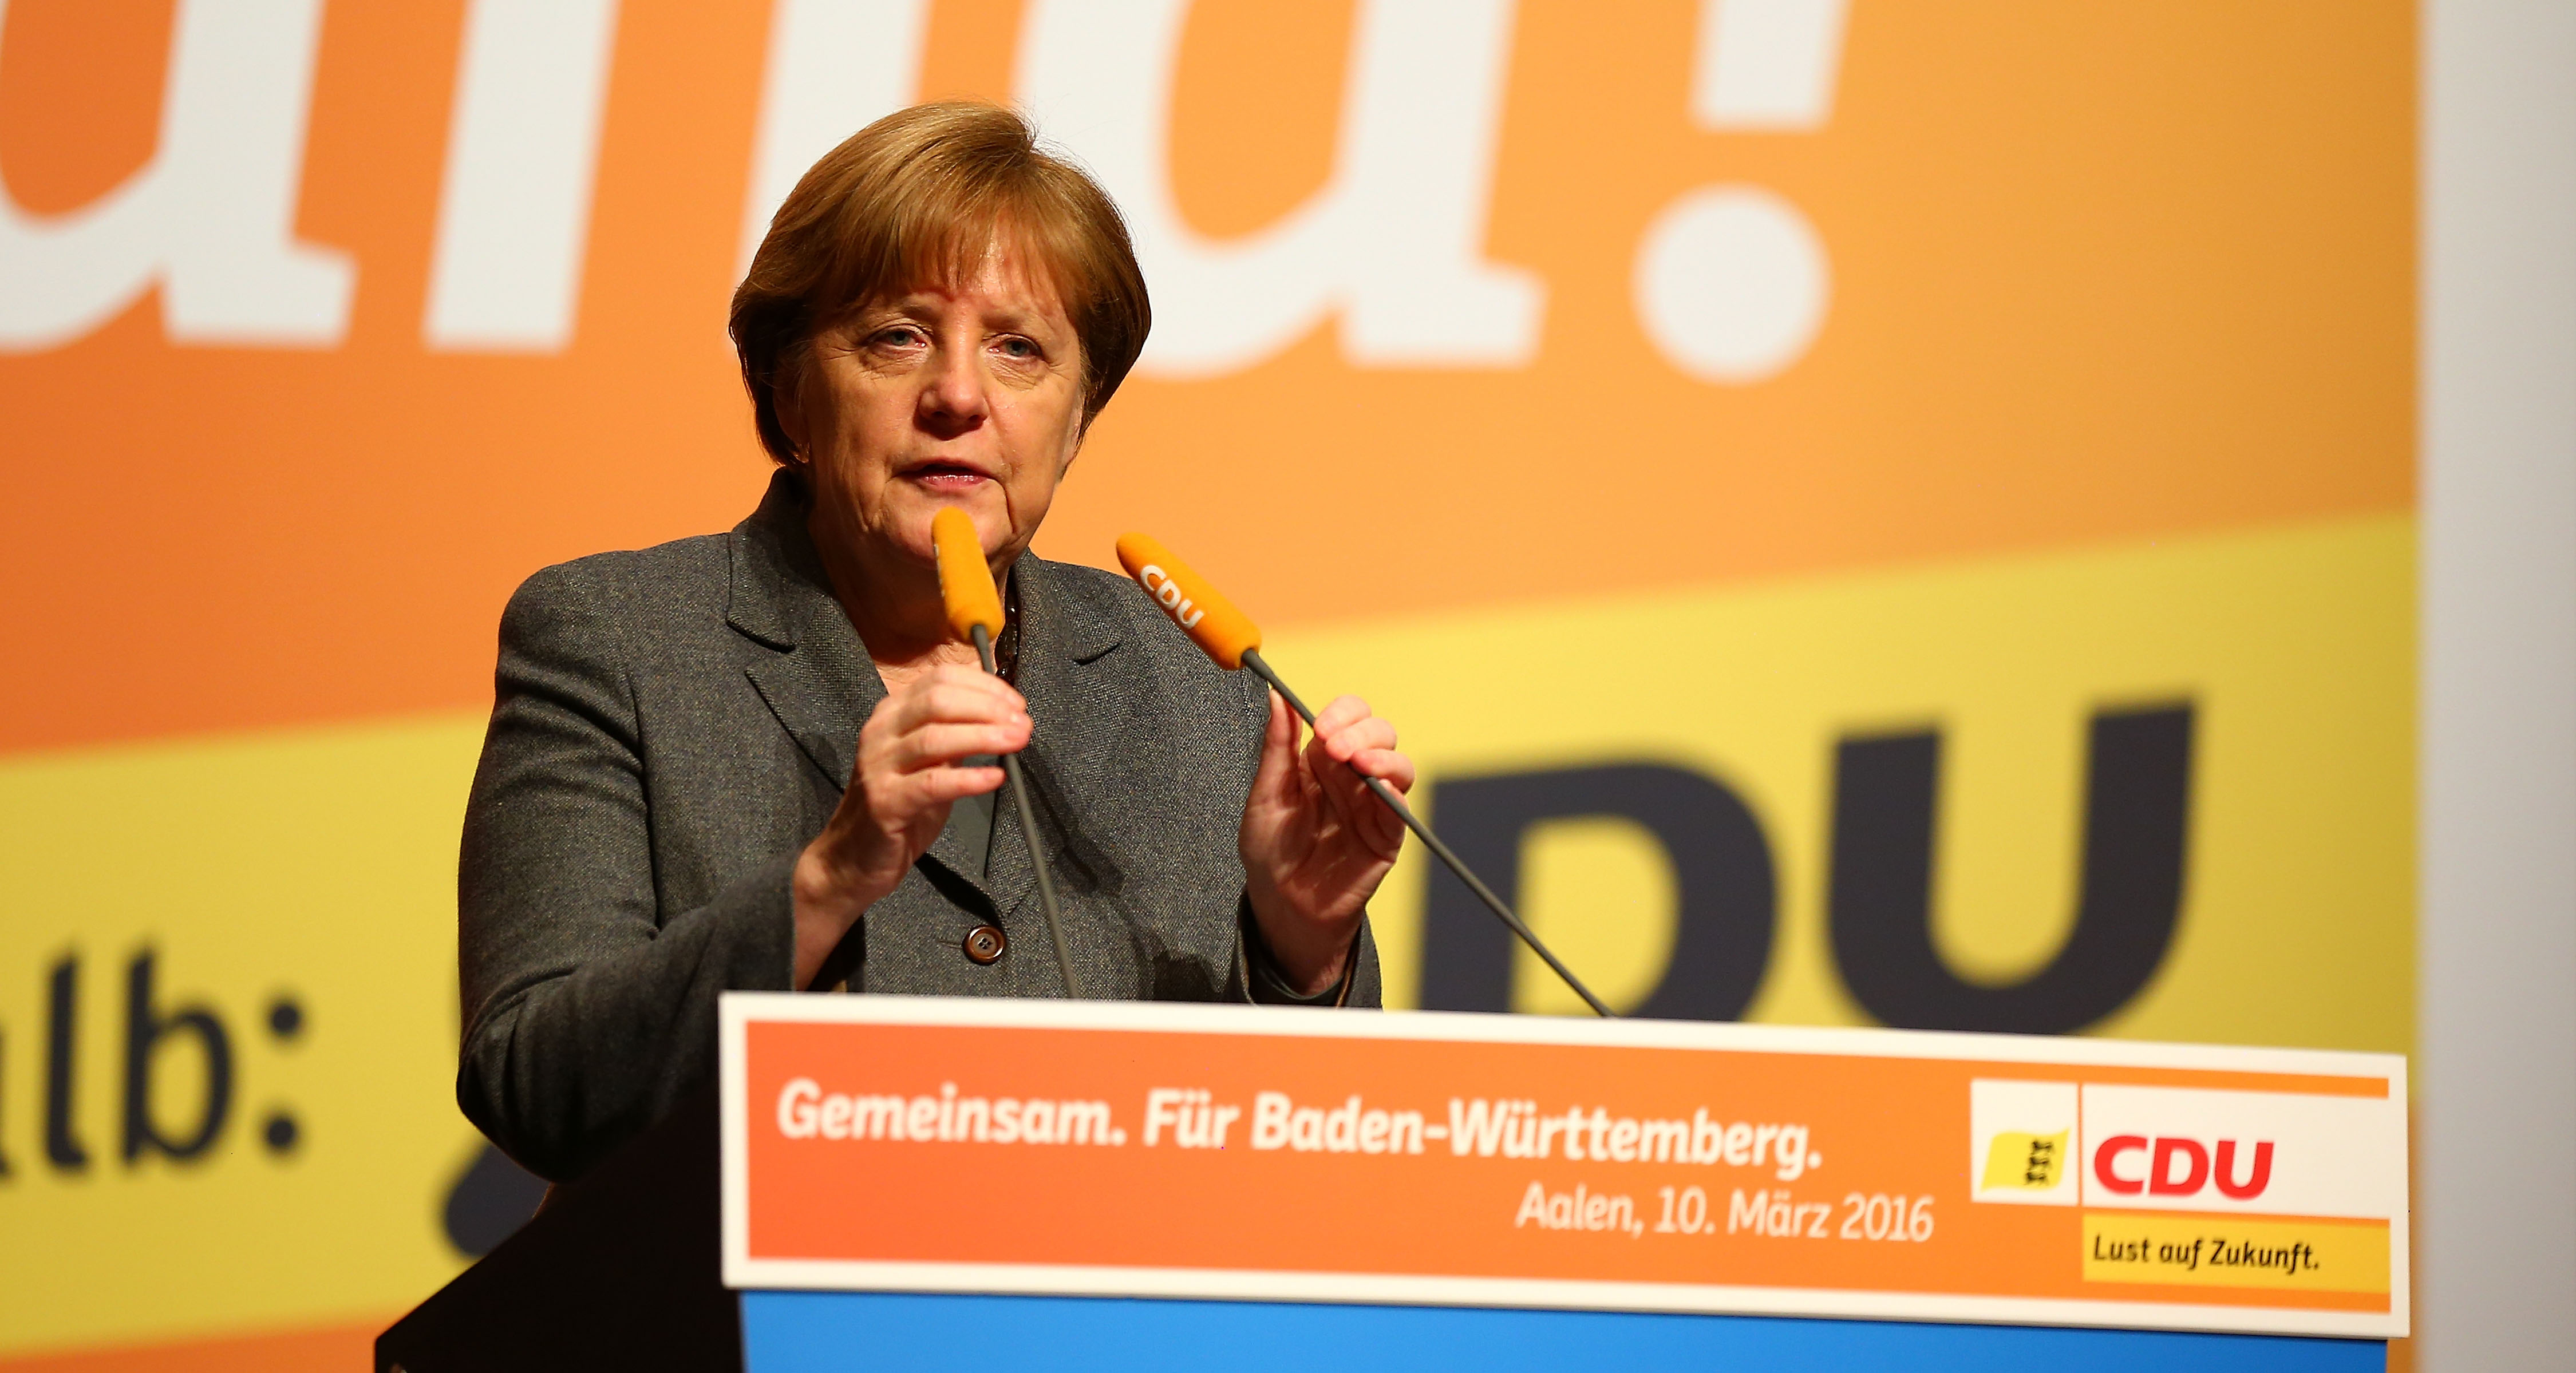 German Chancellor and Chairwoman of the German Christian Democrats (CDU) Angela Merkel speaks to supporters at a CDU campaign rally ahead of Baden-Wuerttemberg state elections on March 10, 2016 in Aalen, Germany. (Thomas Niedermueller&mdash;Getty Images)